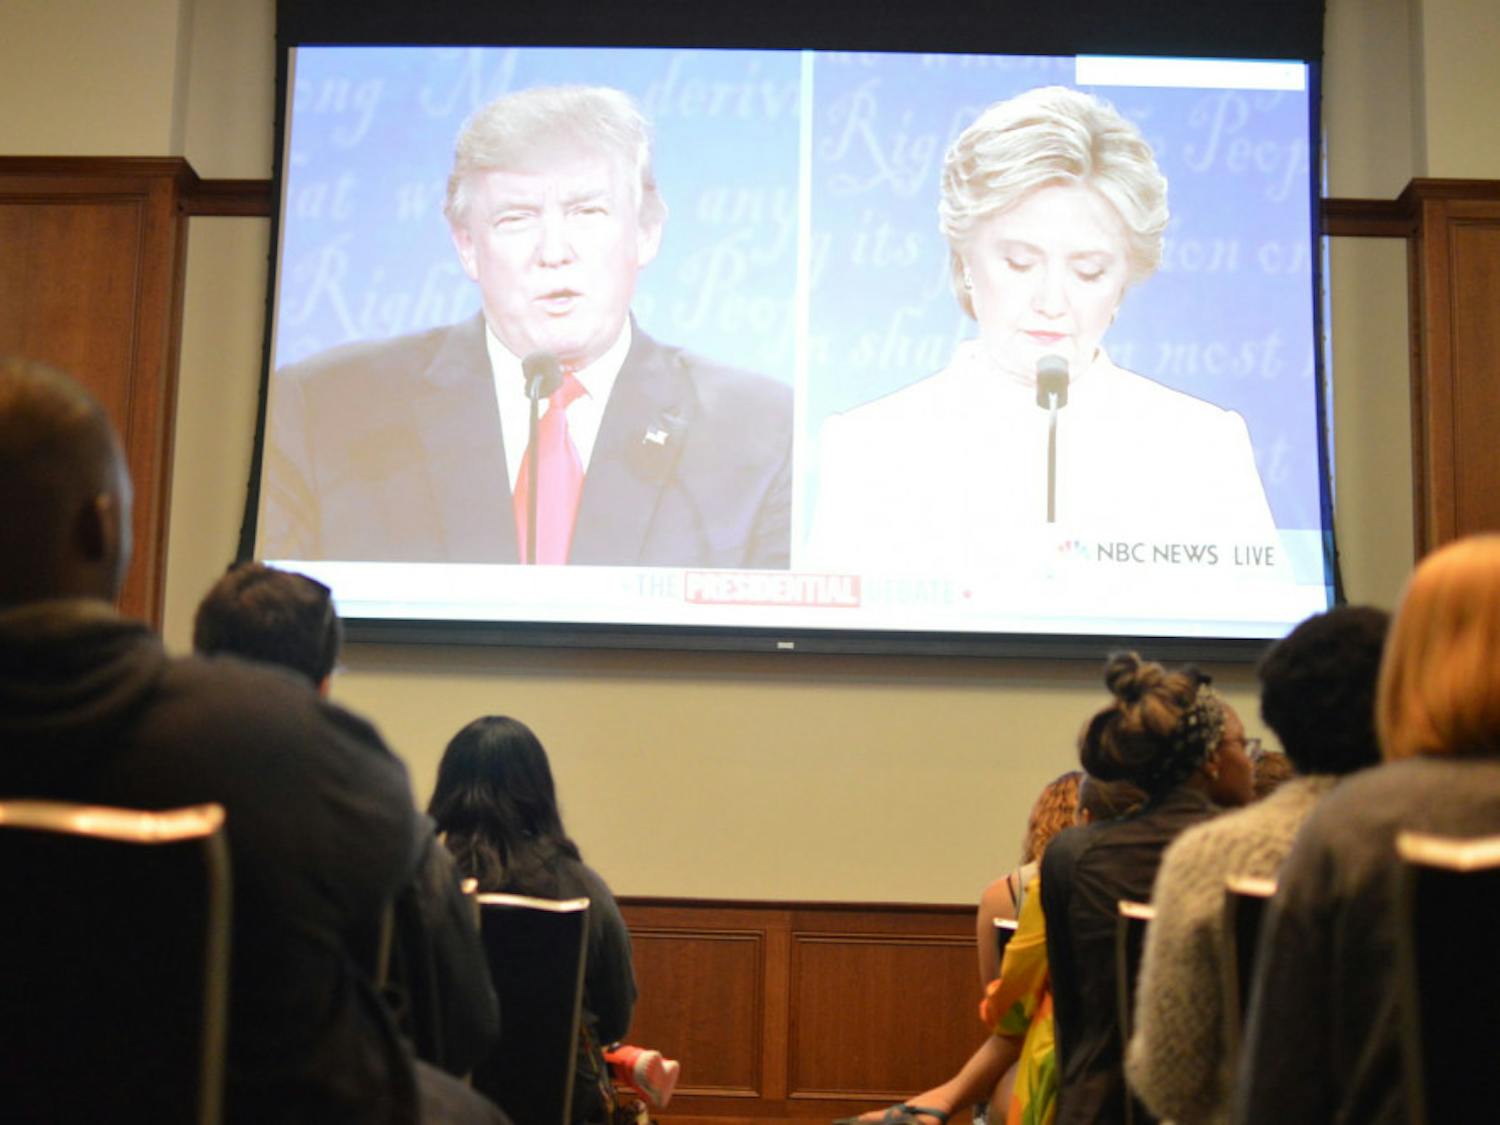 How did college students watch the debates? Through Snapchat.